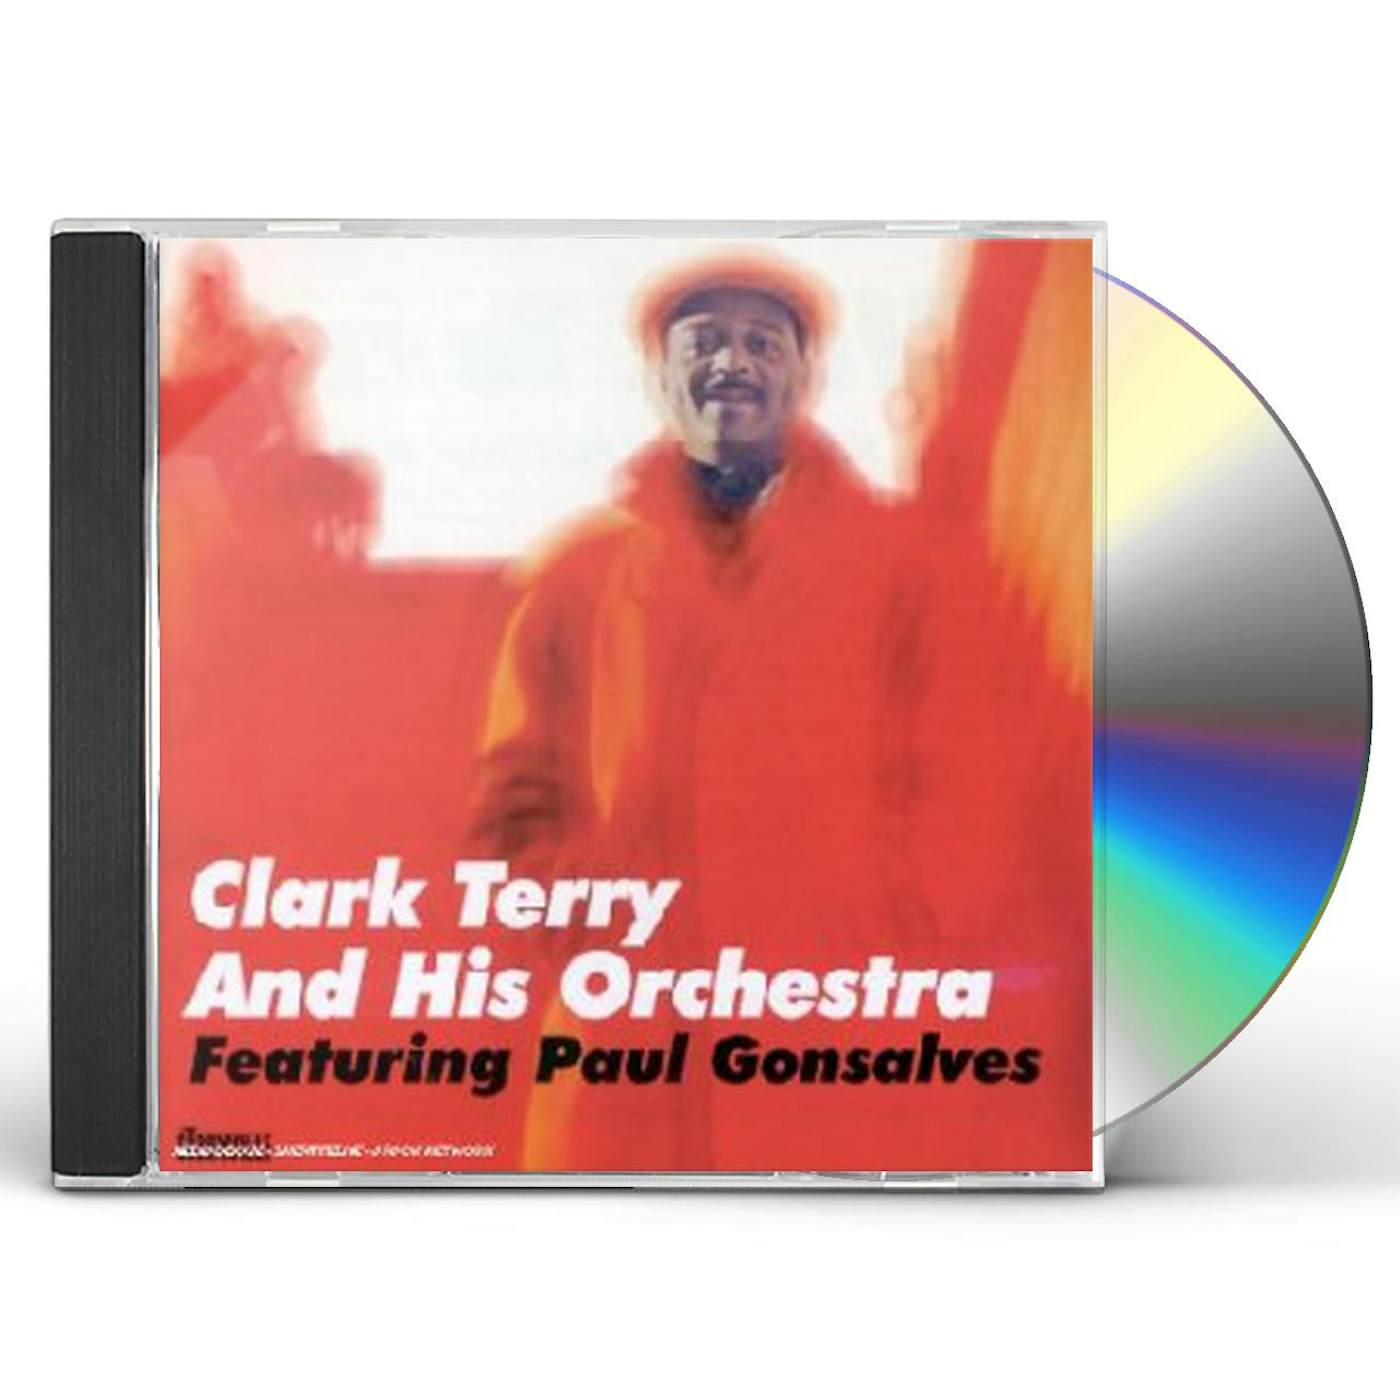 CLARK TERRY & HIS ORCHESTRA CD